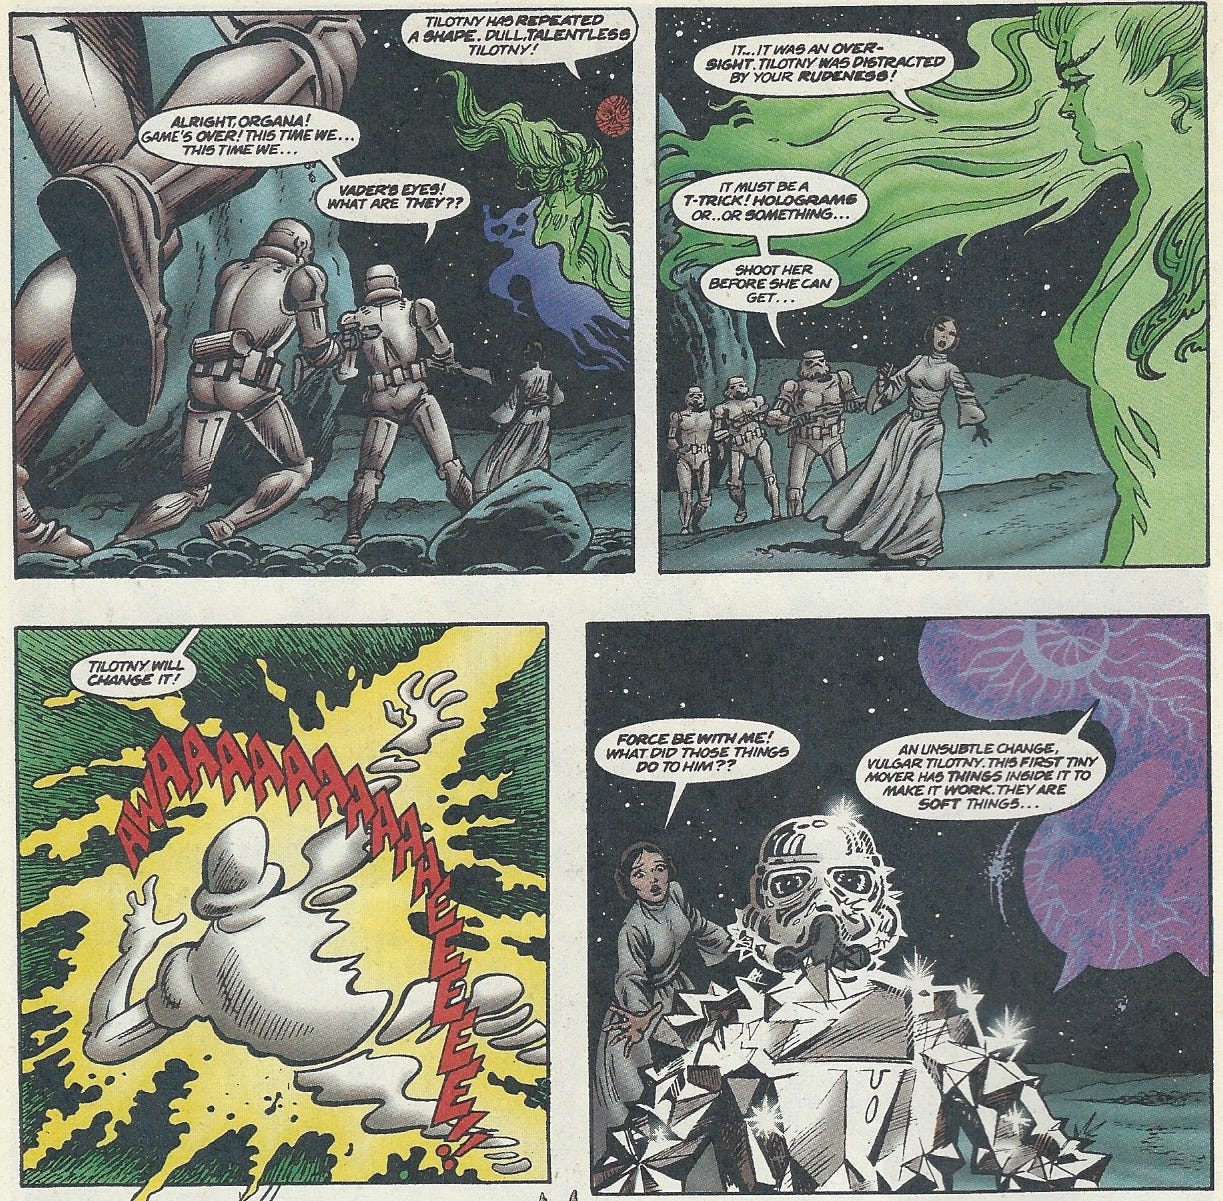 Panel 1: three stormtroopers stumble to a halt in their pursuit of Princess Leia, as all of them gawk at the strange, immaterial beings floating before them. One is a red and black orb, the other a floating emerald woman apparently made of a wavey, fluid material, and a simple, smokey figure. Stormtrooper: Alright, Organa! Game’s over! This time we… this time we… Cold Danda Sine (The red orb): Tiltony has repeated a shape. Dull, talentless Tiltony! Stormtrooper: Vader’s eyes! What are they??  Panel 2: The flowing green figure, Tiltony, looks down at the four humans as they stumble along the stands, looking up in shock. She does not look amused. Tiltony: It… it was an oversight. Tiltony was distracted by your rudeness! Stormtrooper: It must be a t-trick! Holograms or… or something… Shoot her before she can get… Panel 3: The lead stormtrooper has been reduced to an outline of flowing, mercury like liquid as he’s struck by a yellow beam of energy. Tiltony: Tiltony will change it! Stormtrooper: Awaaaaaaaaeeee!! Panel 4: The stormtrooper is now made of a shining, rock-like substance, unmoving. Leia motions towards it, horrified, while the purple, amoeba-like form of Horliss-Horliss drifts towards the two. Leia: Force be with me! What did those things do to him?? Horliss-Horliss: An unsubtle change, vulgar Tiltony. This first tiny mover has things inside it to make it work. They are soft things…